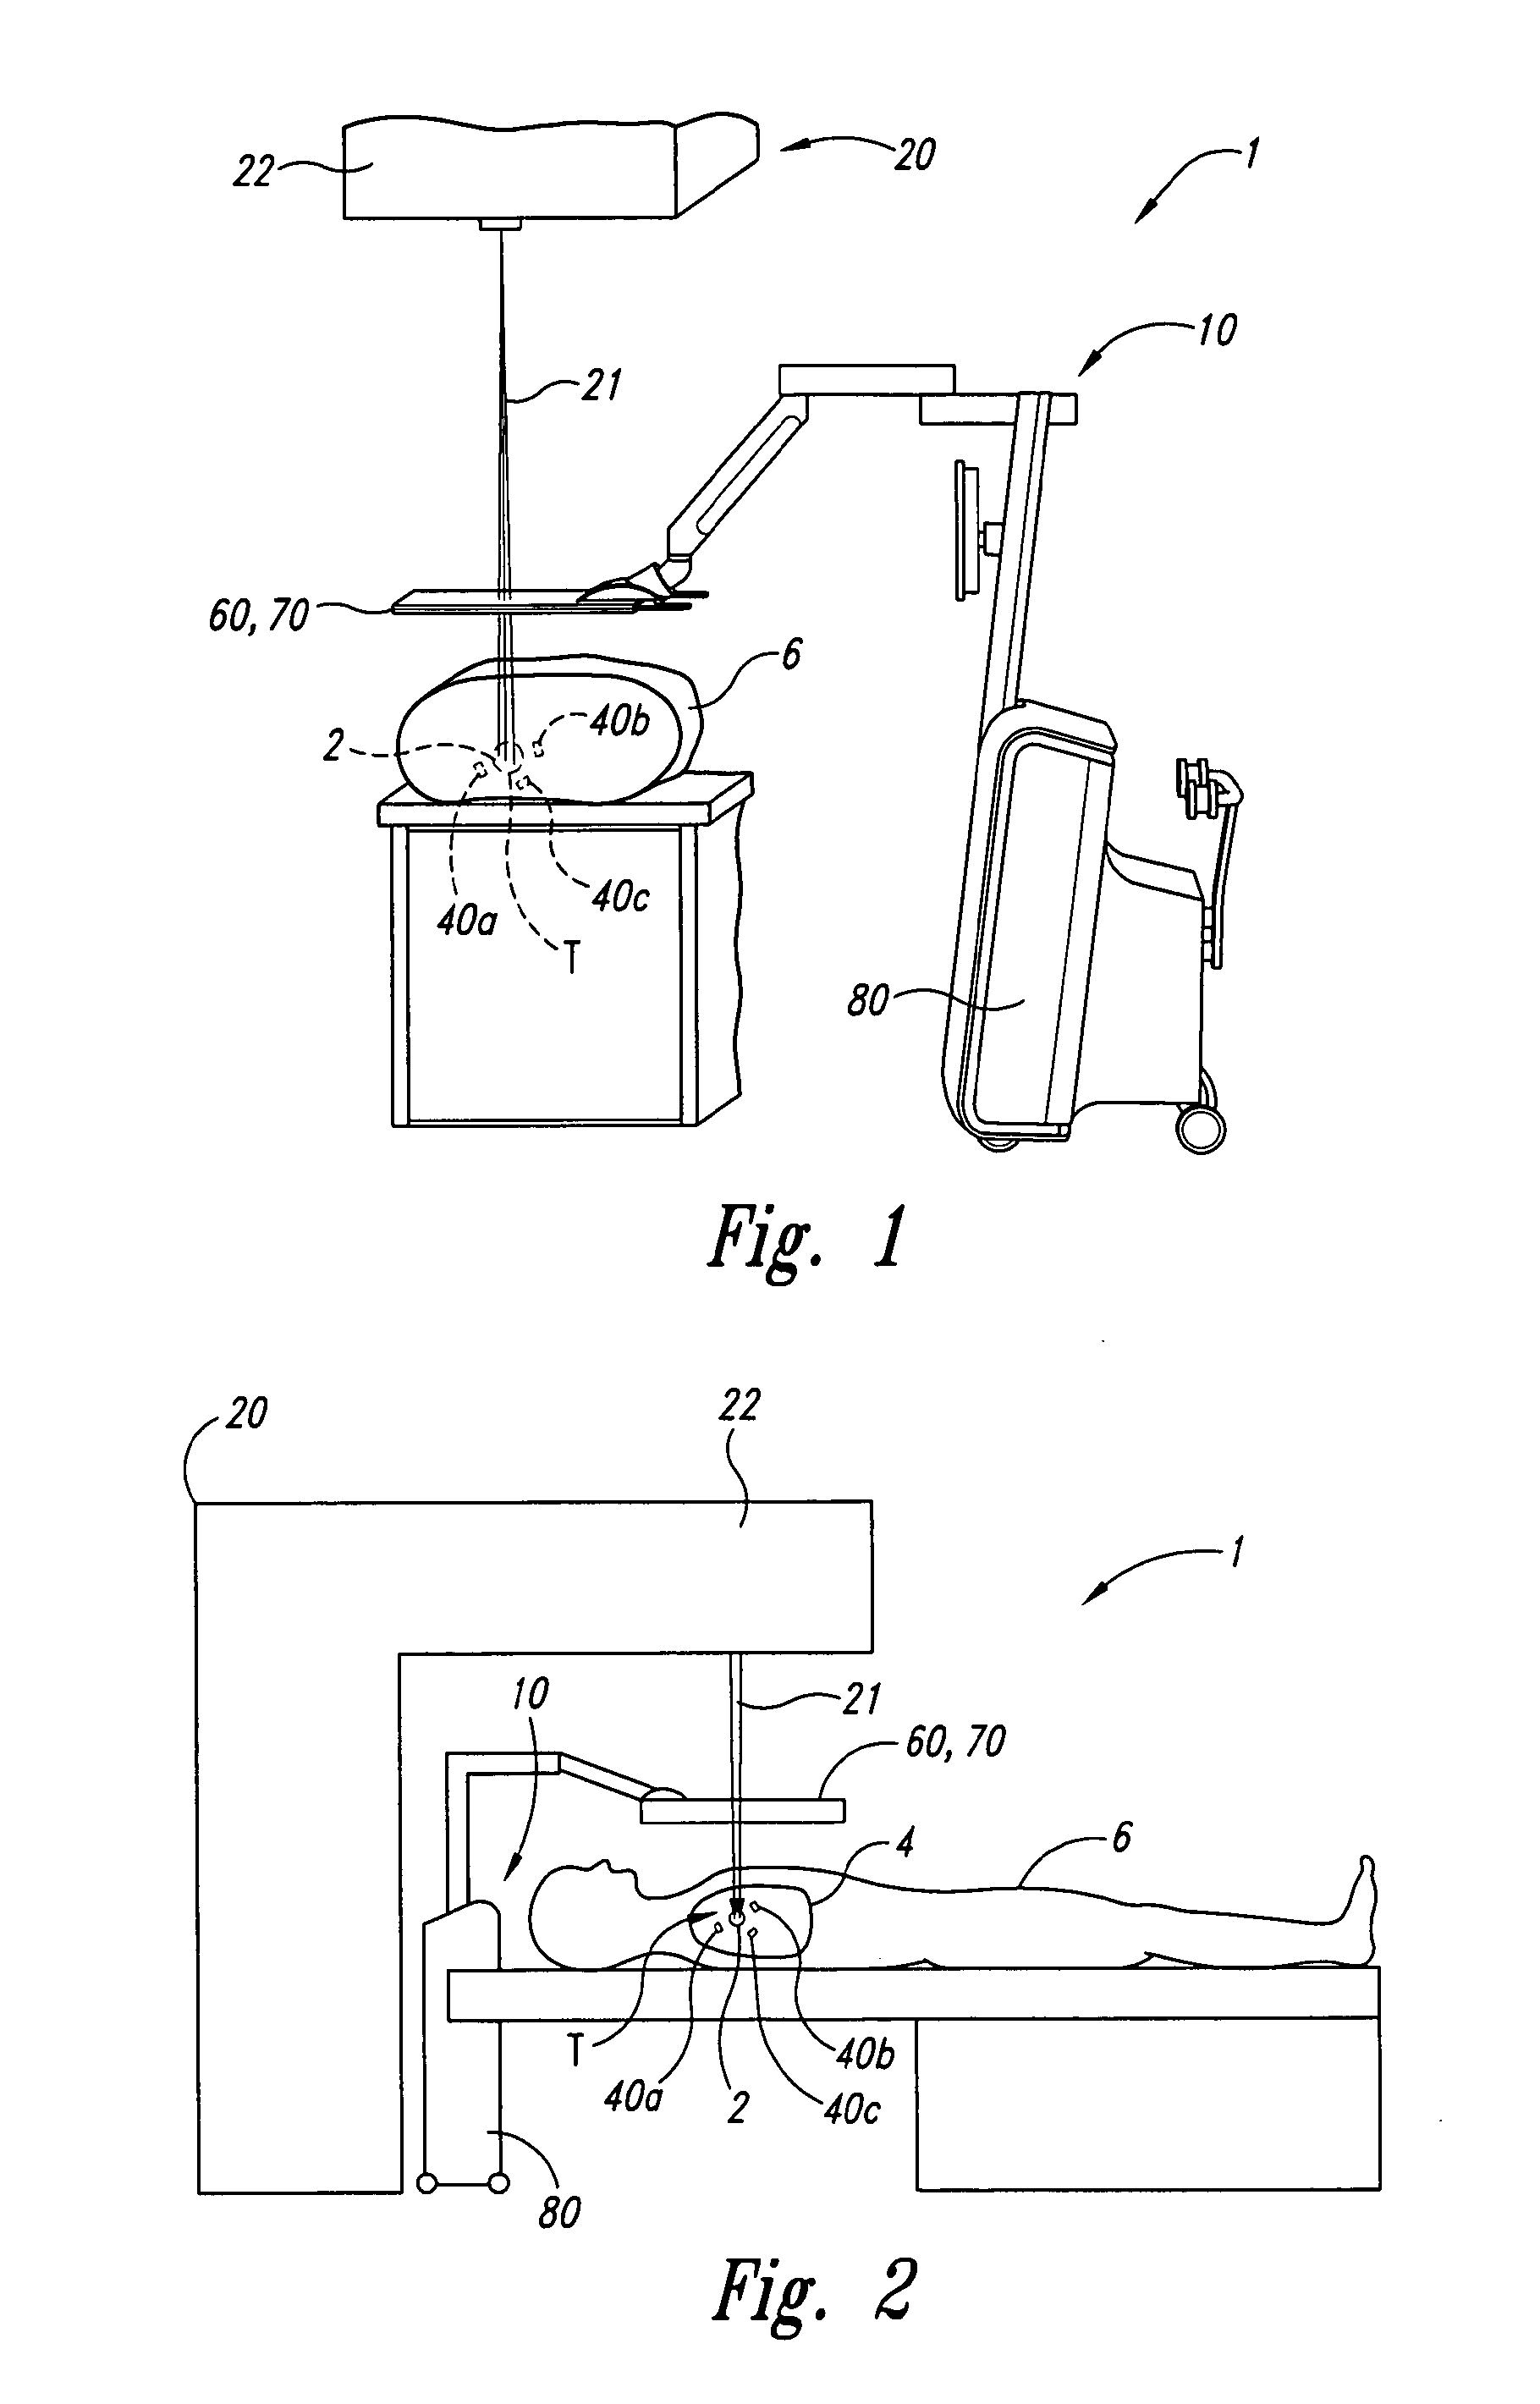 Systems and methods for real-time tracking of targets in radiation therapy and other medical applications